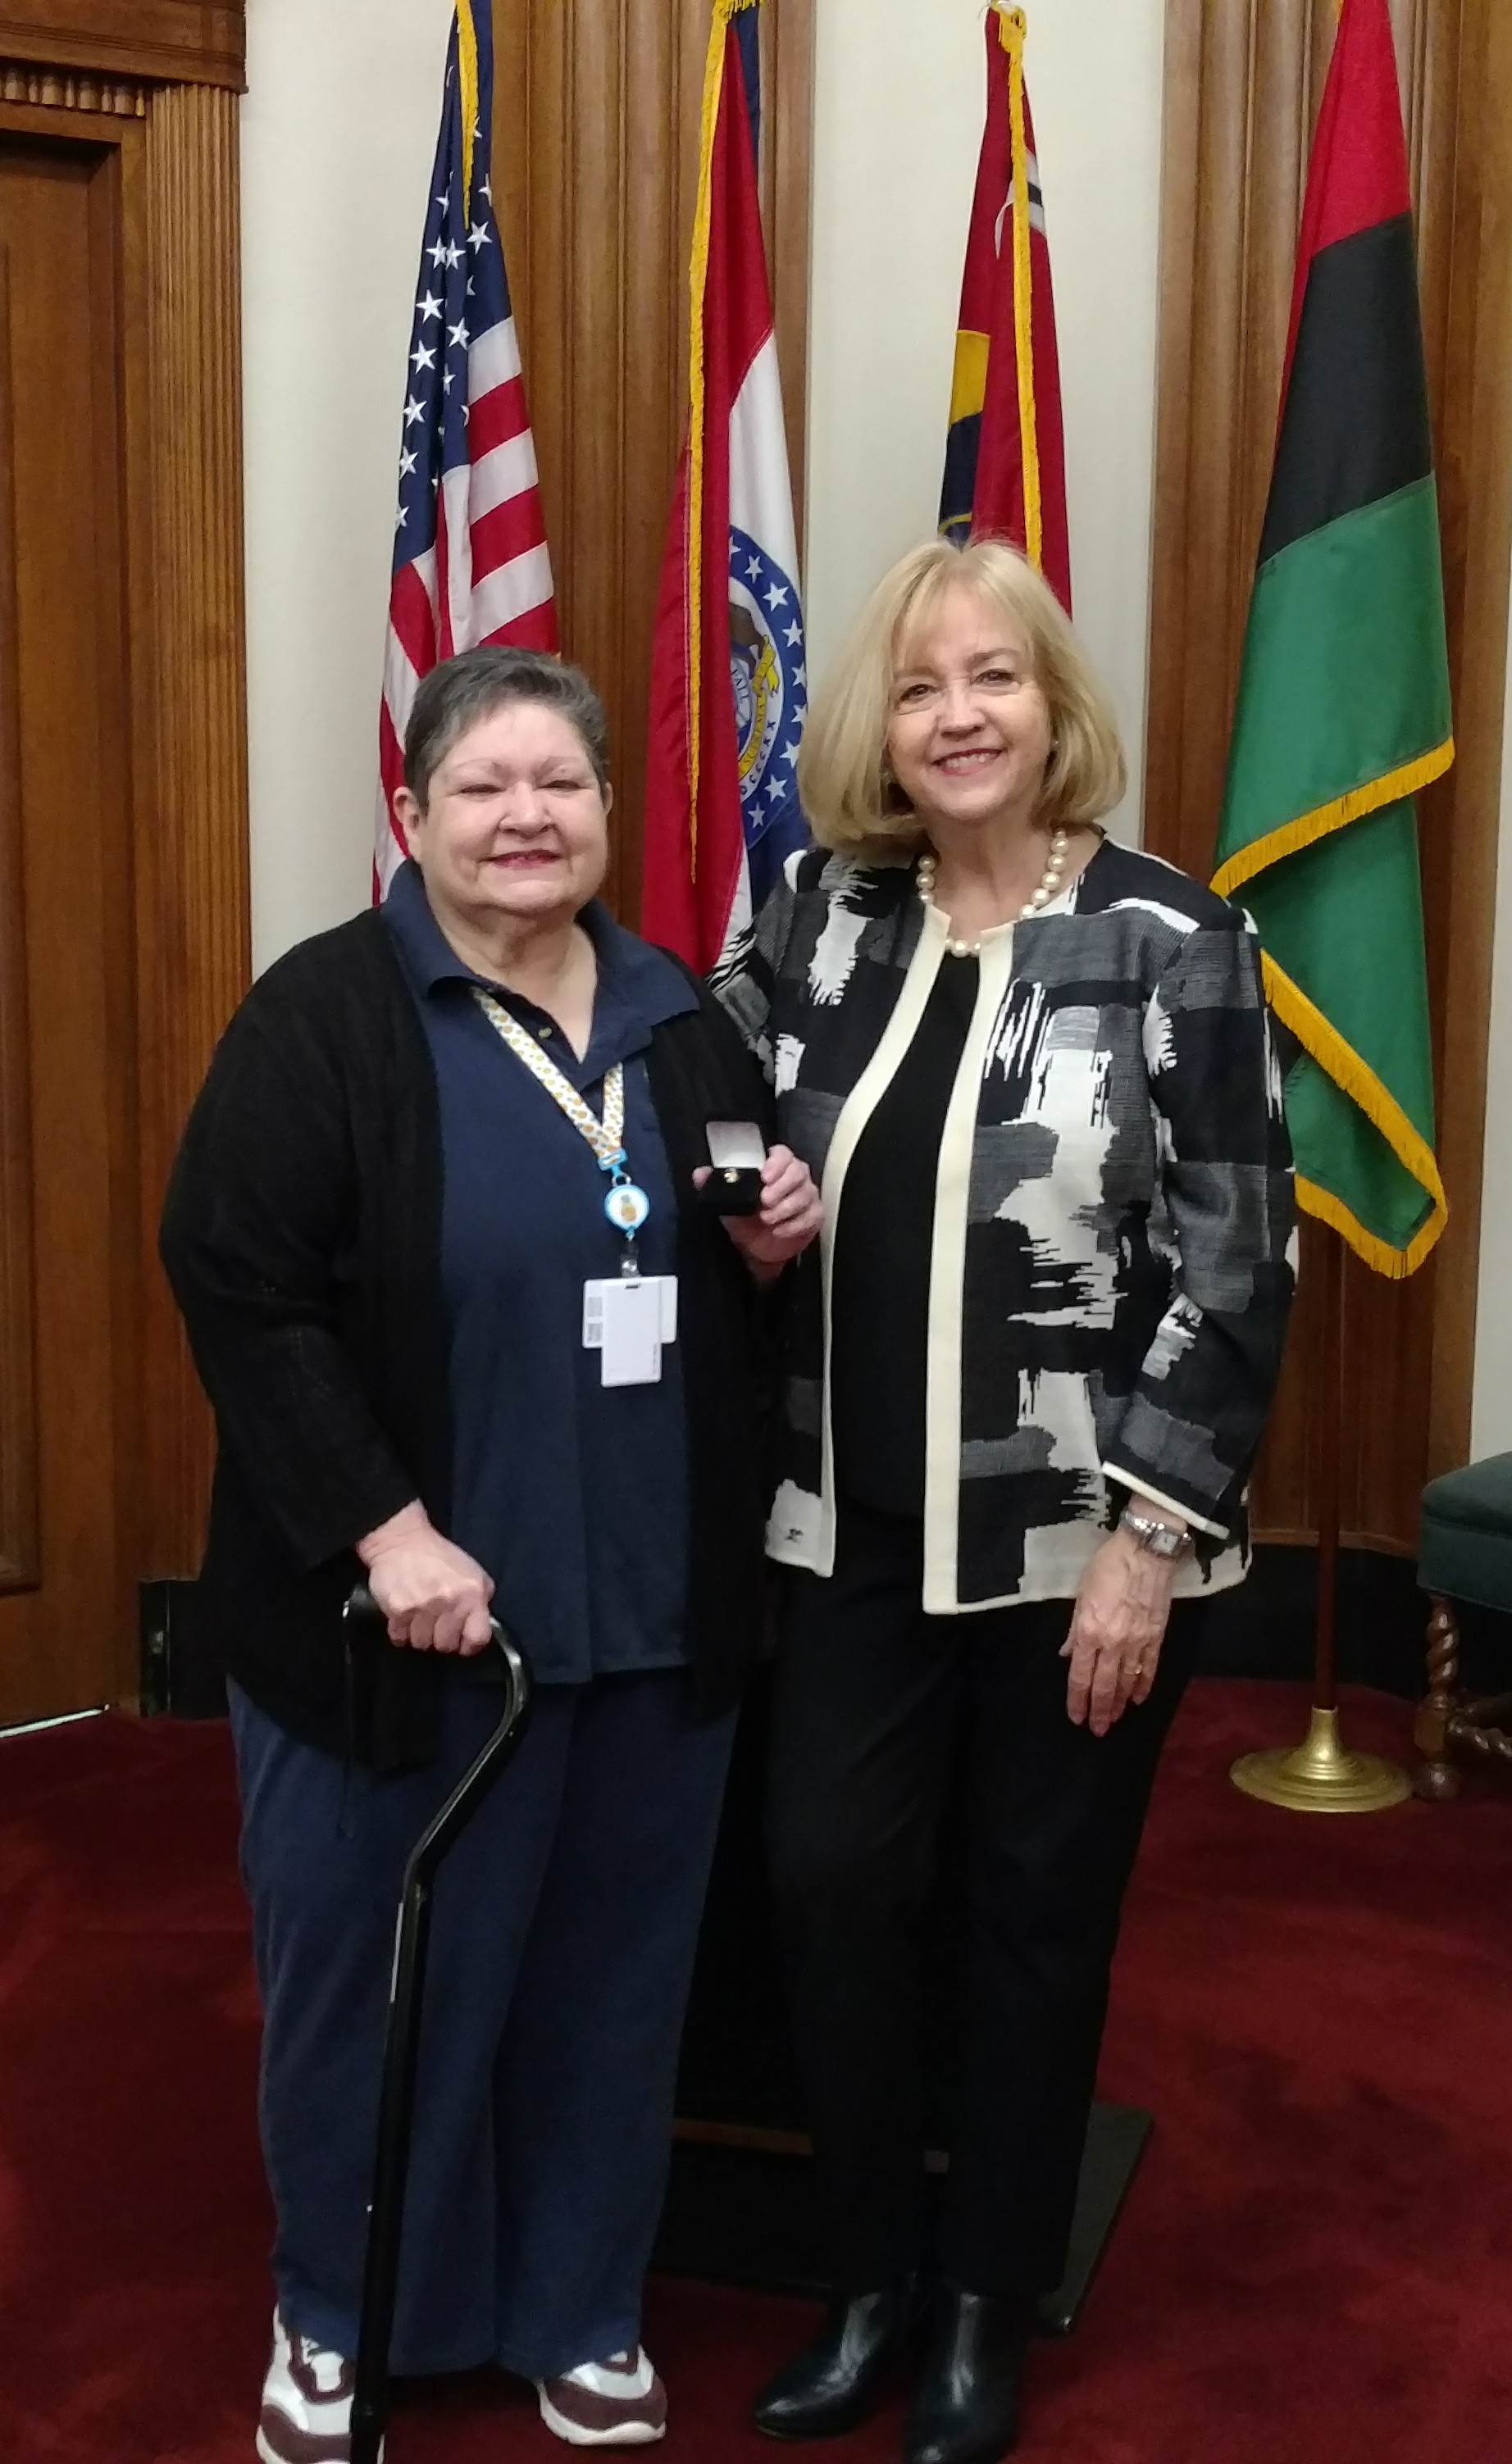 Mayor Lyda Krewson recognizes Patricia Young for her many years of service with the City.